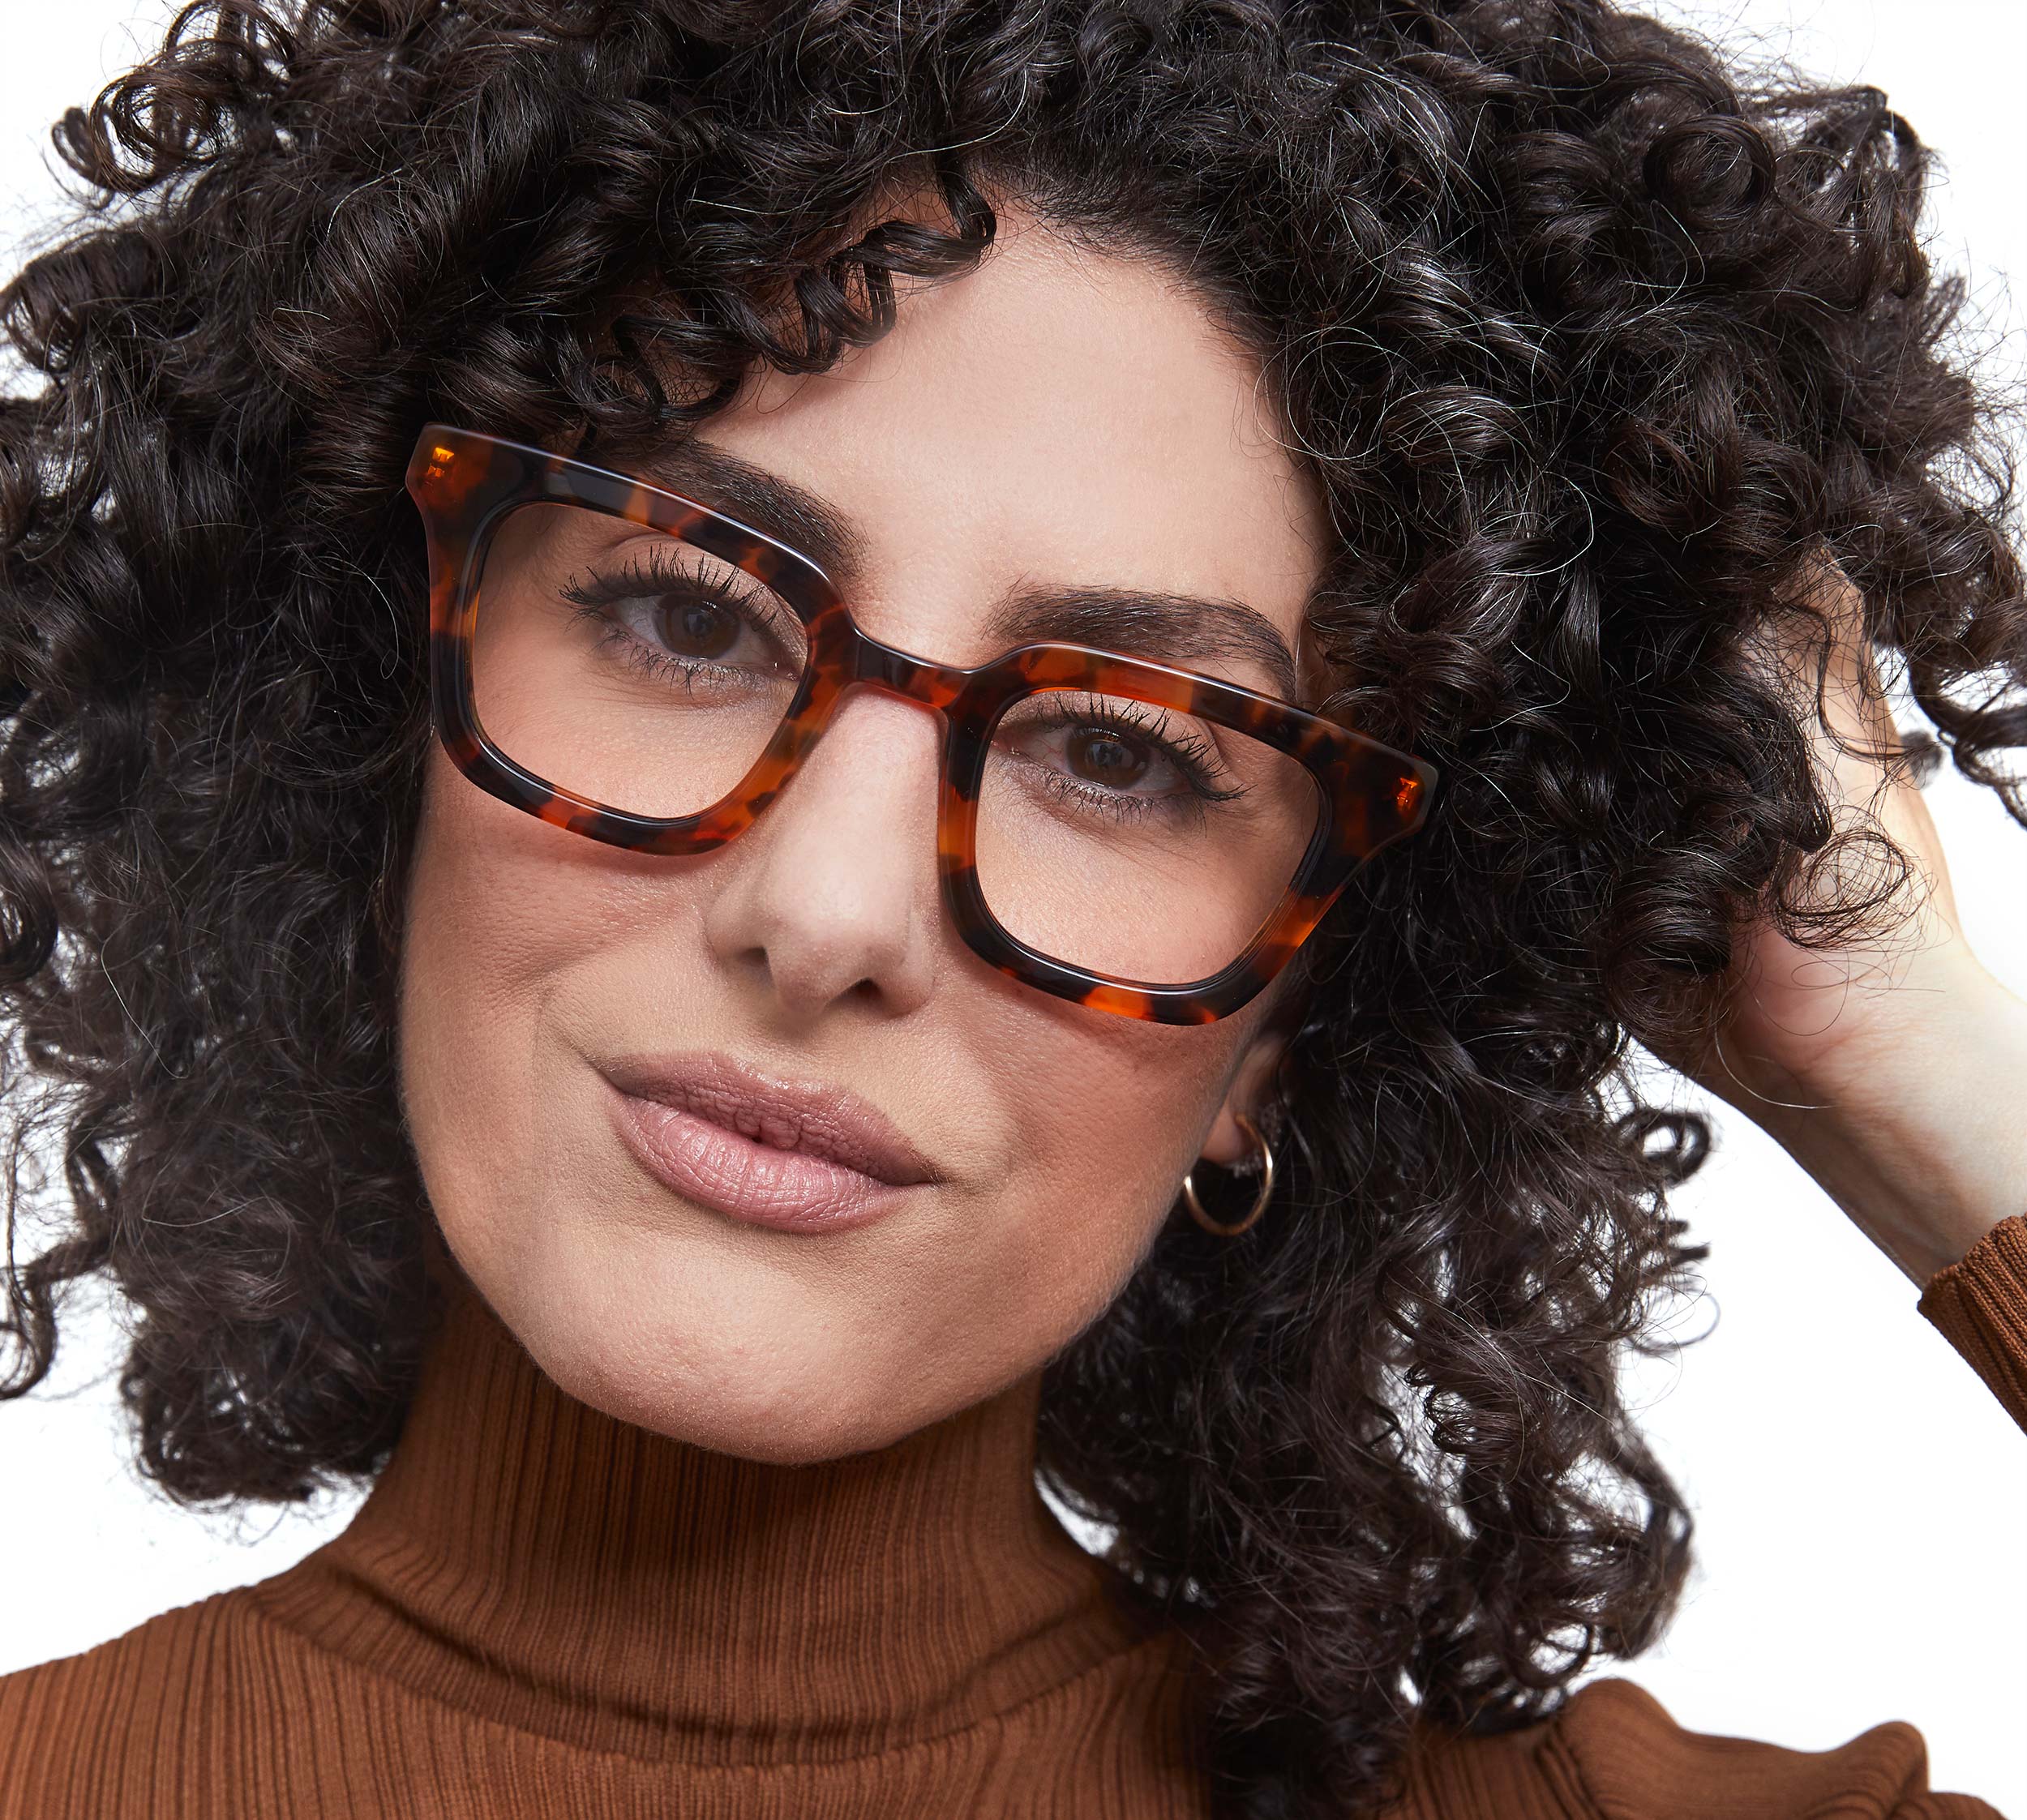 Photo of a man or woman wearing Ysée Clear Reading Glasses by French Kiwis